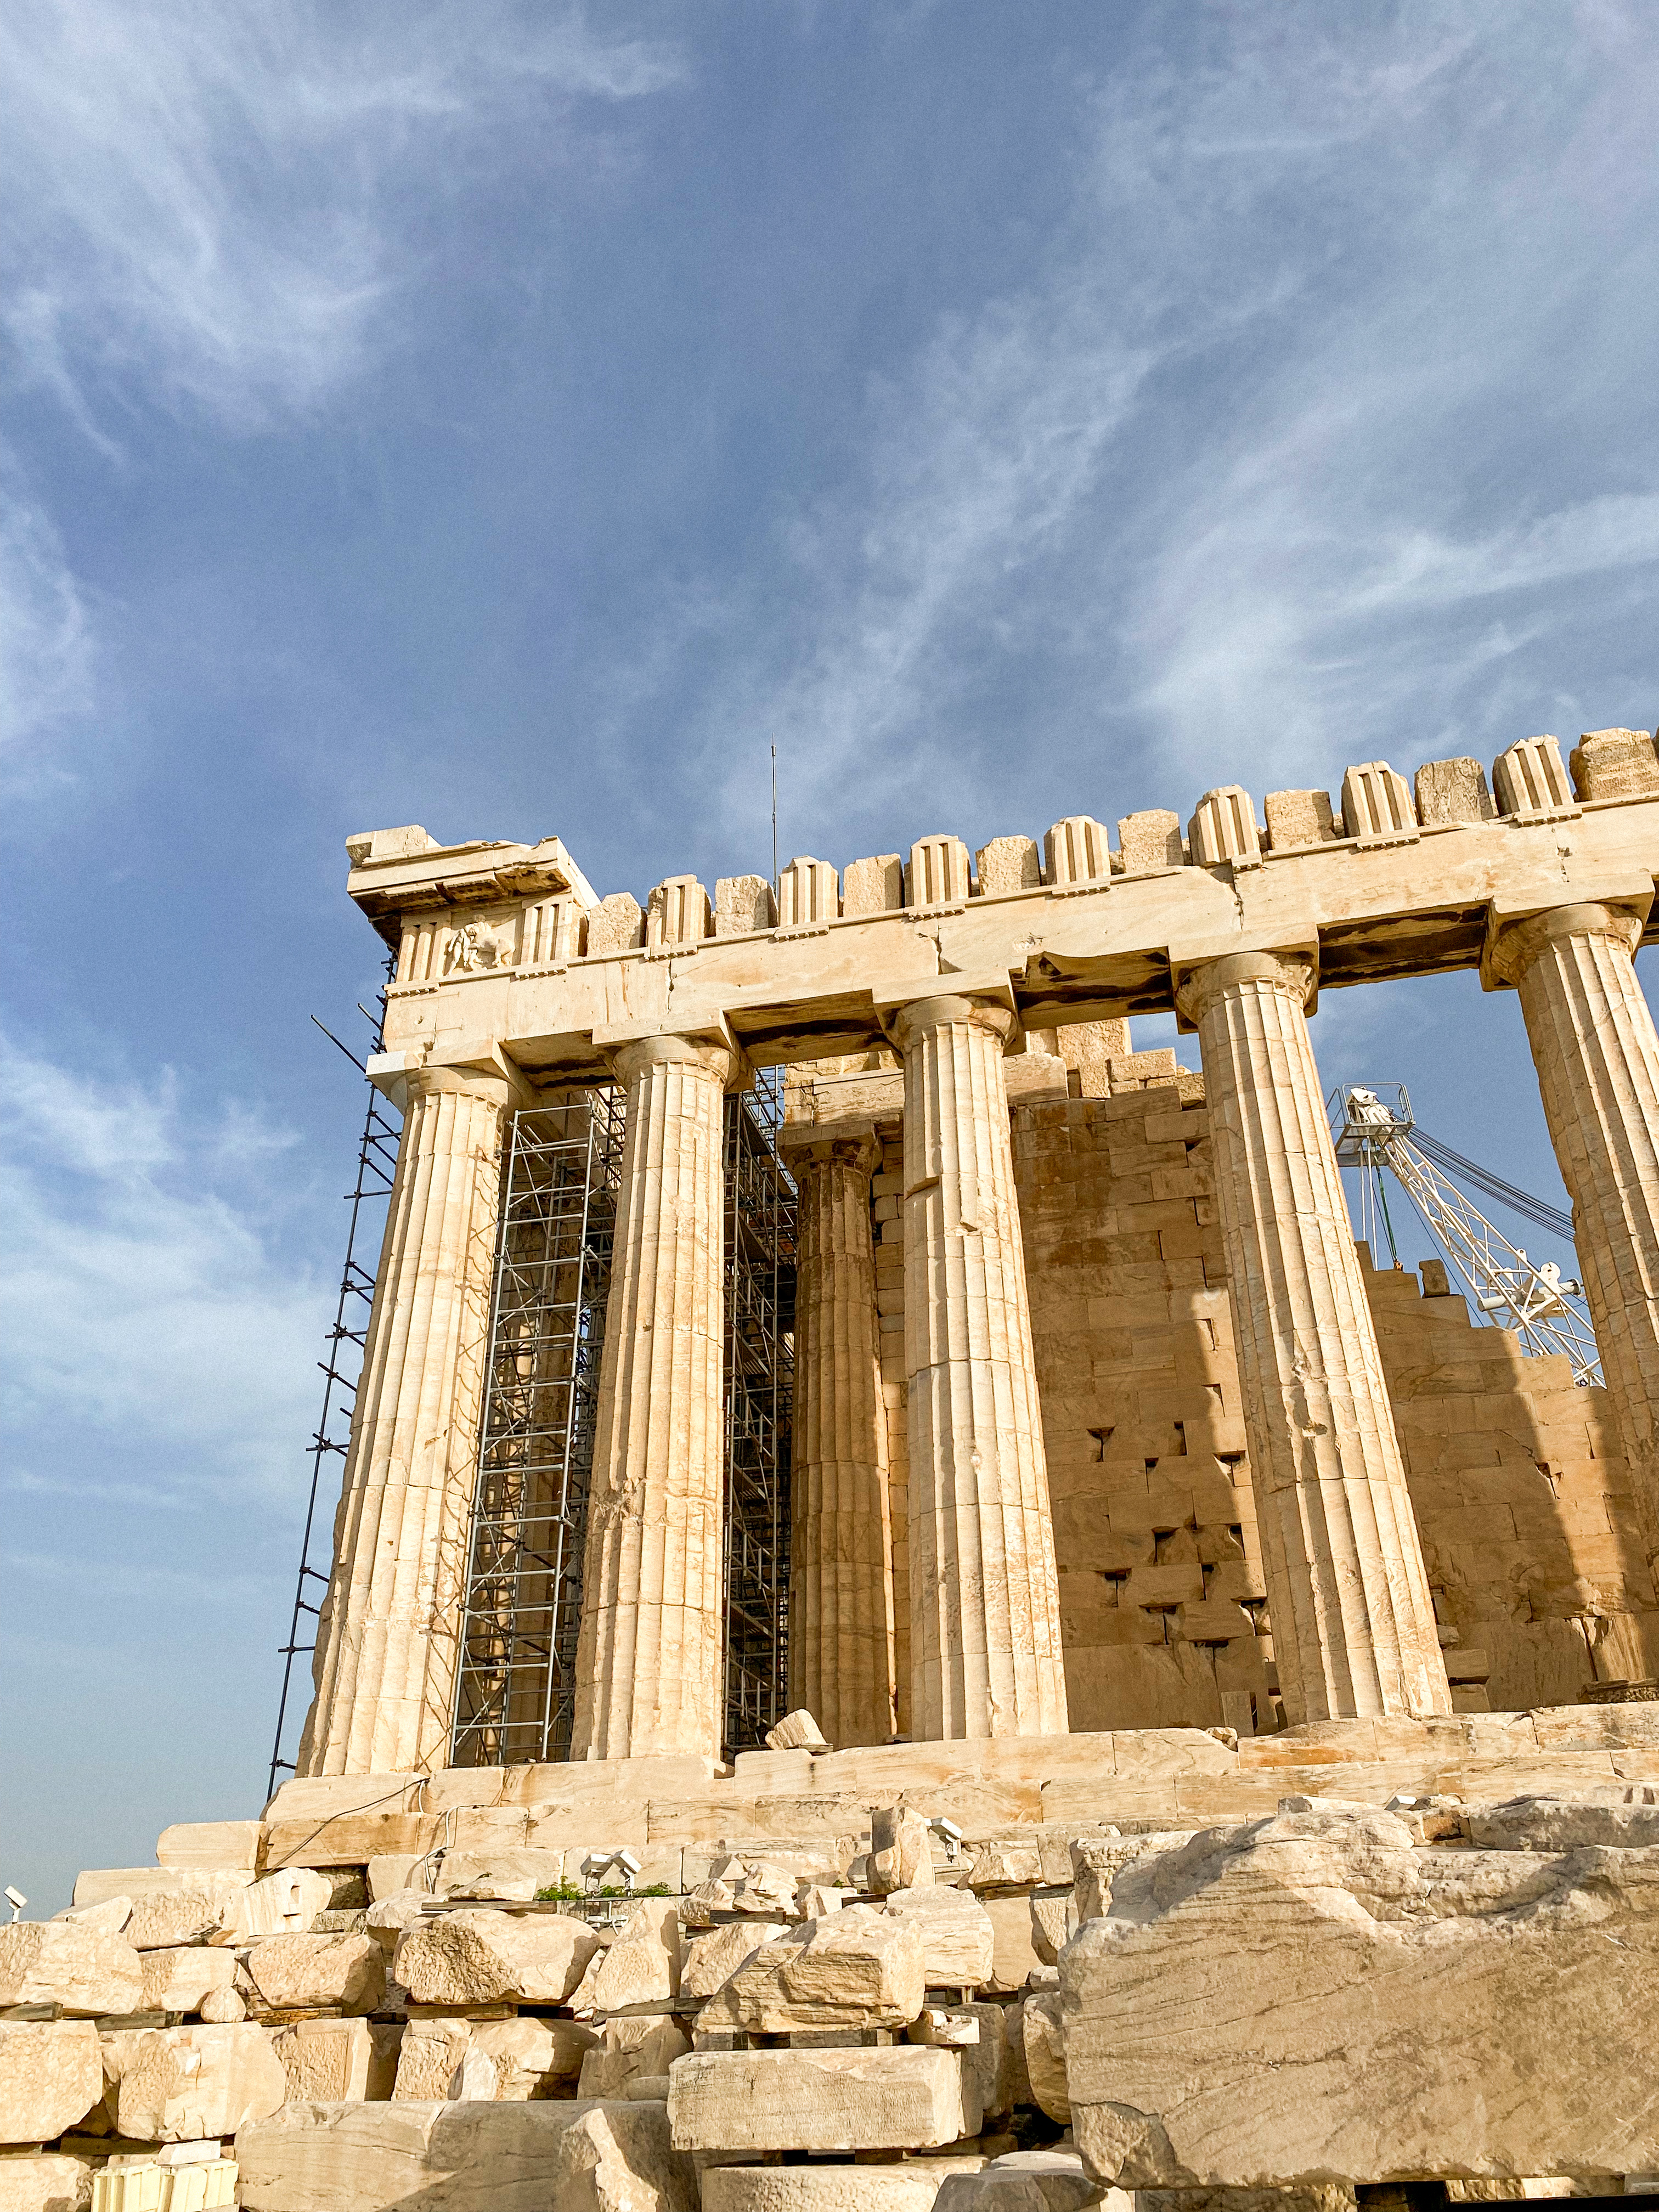 The Parthenon under a clear blue sky, showcasing the ancient structure's iconic Doric columns and ongoing restoration work, with scaffolding visible against the sun-bleached stone on the Acropolis of Athens